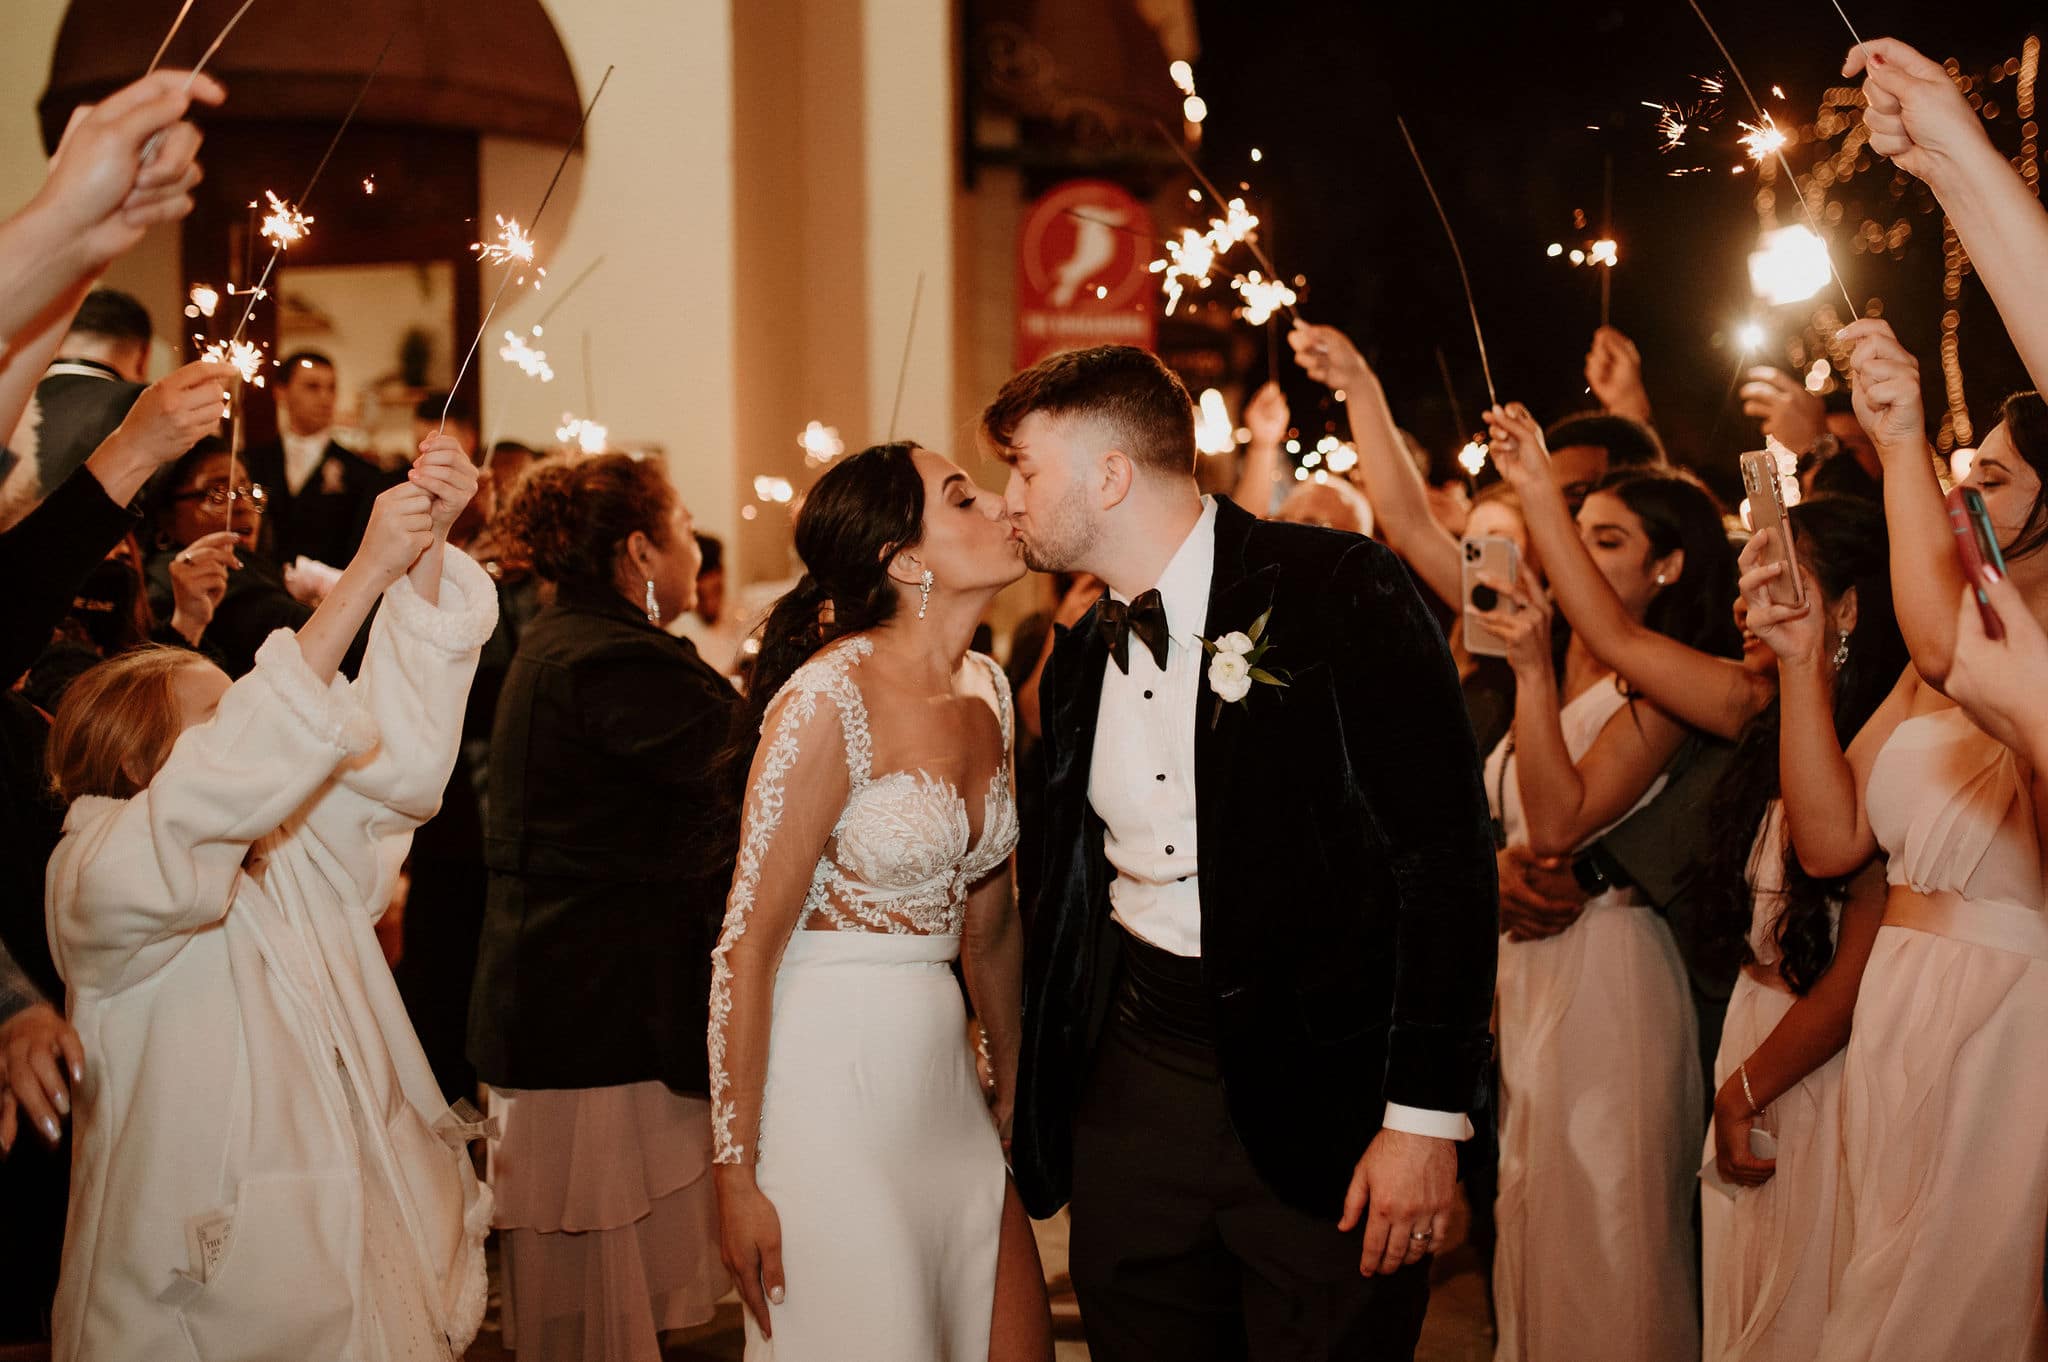 newly married couple kissing after leaving their st. augustine winter wedding with guests waving sparklers around them